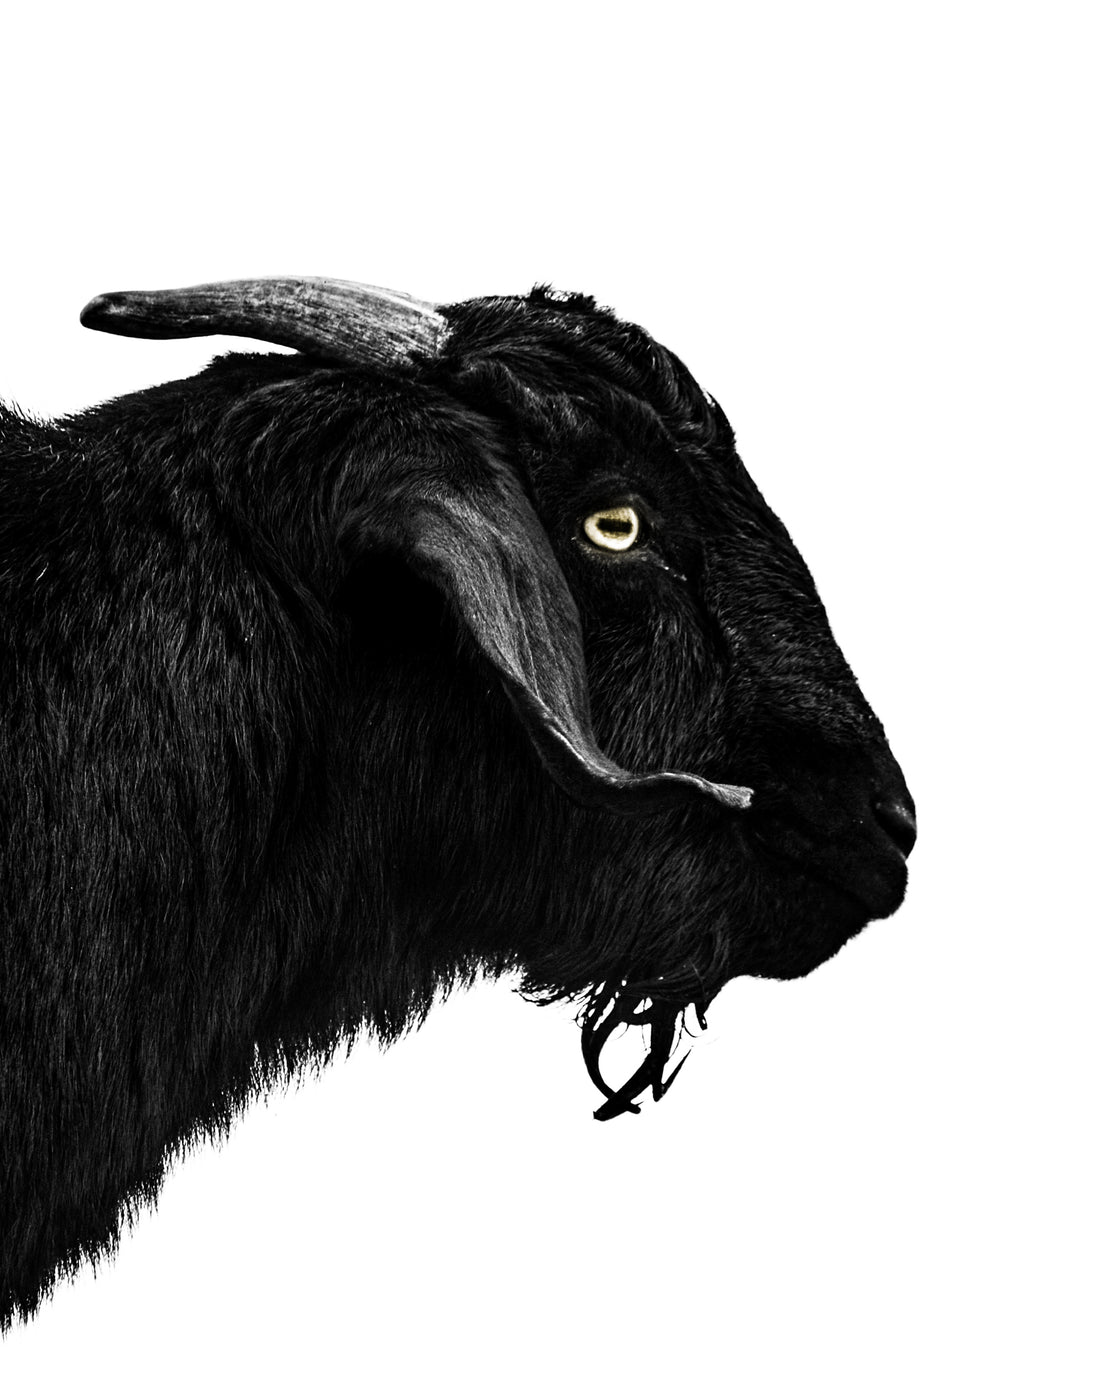 A black and white photo of a black bearded goat. Ethan Oberst Photography